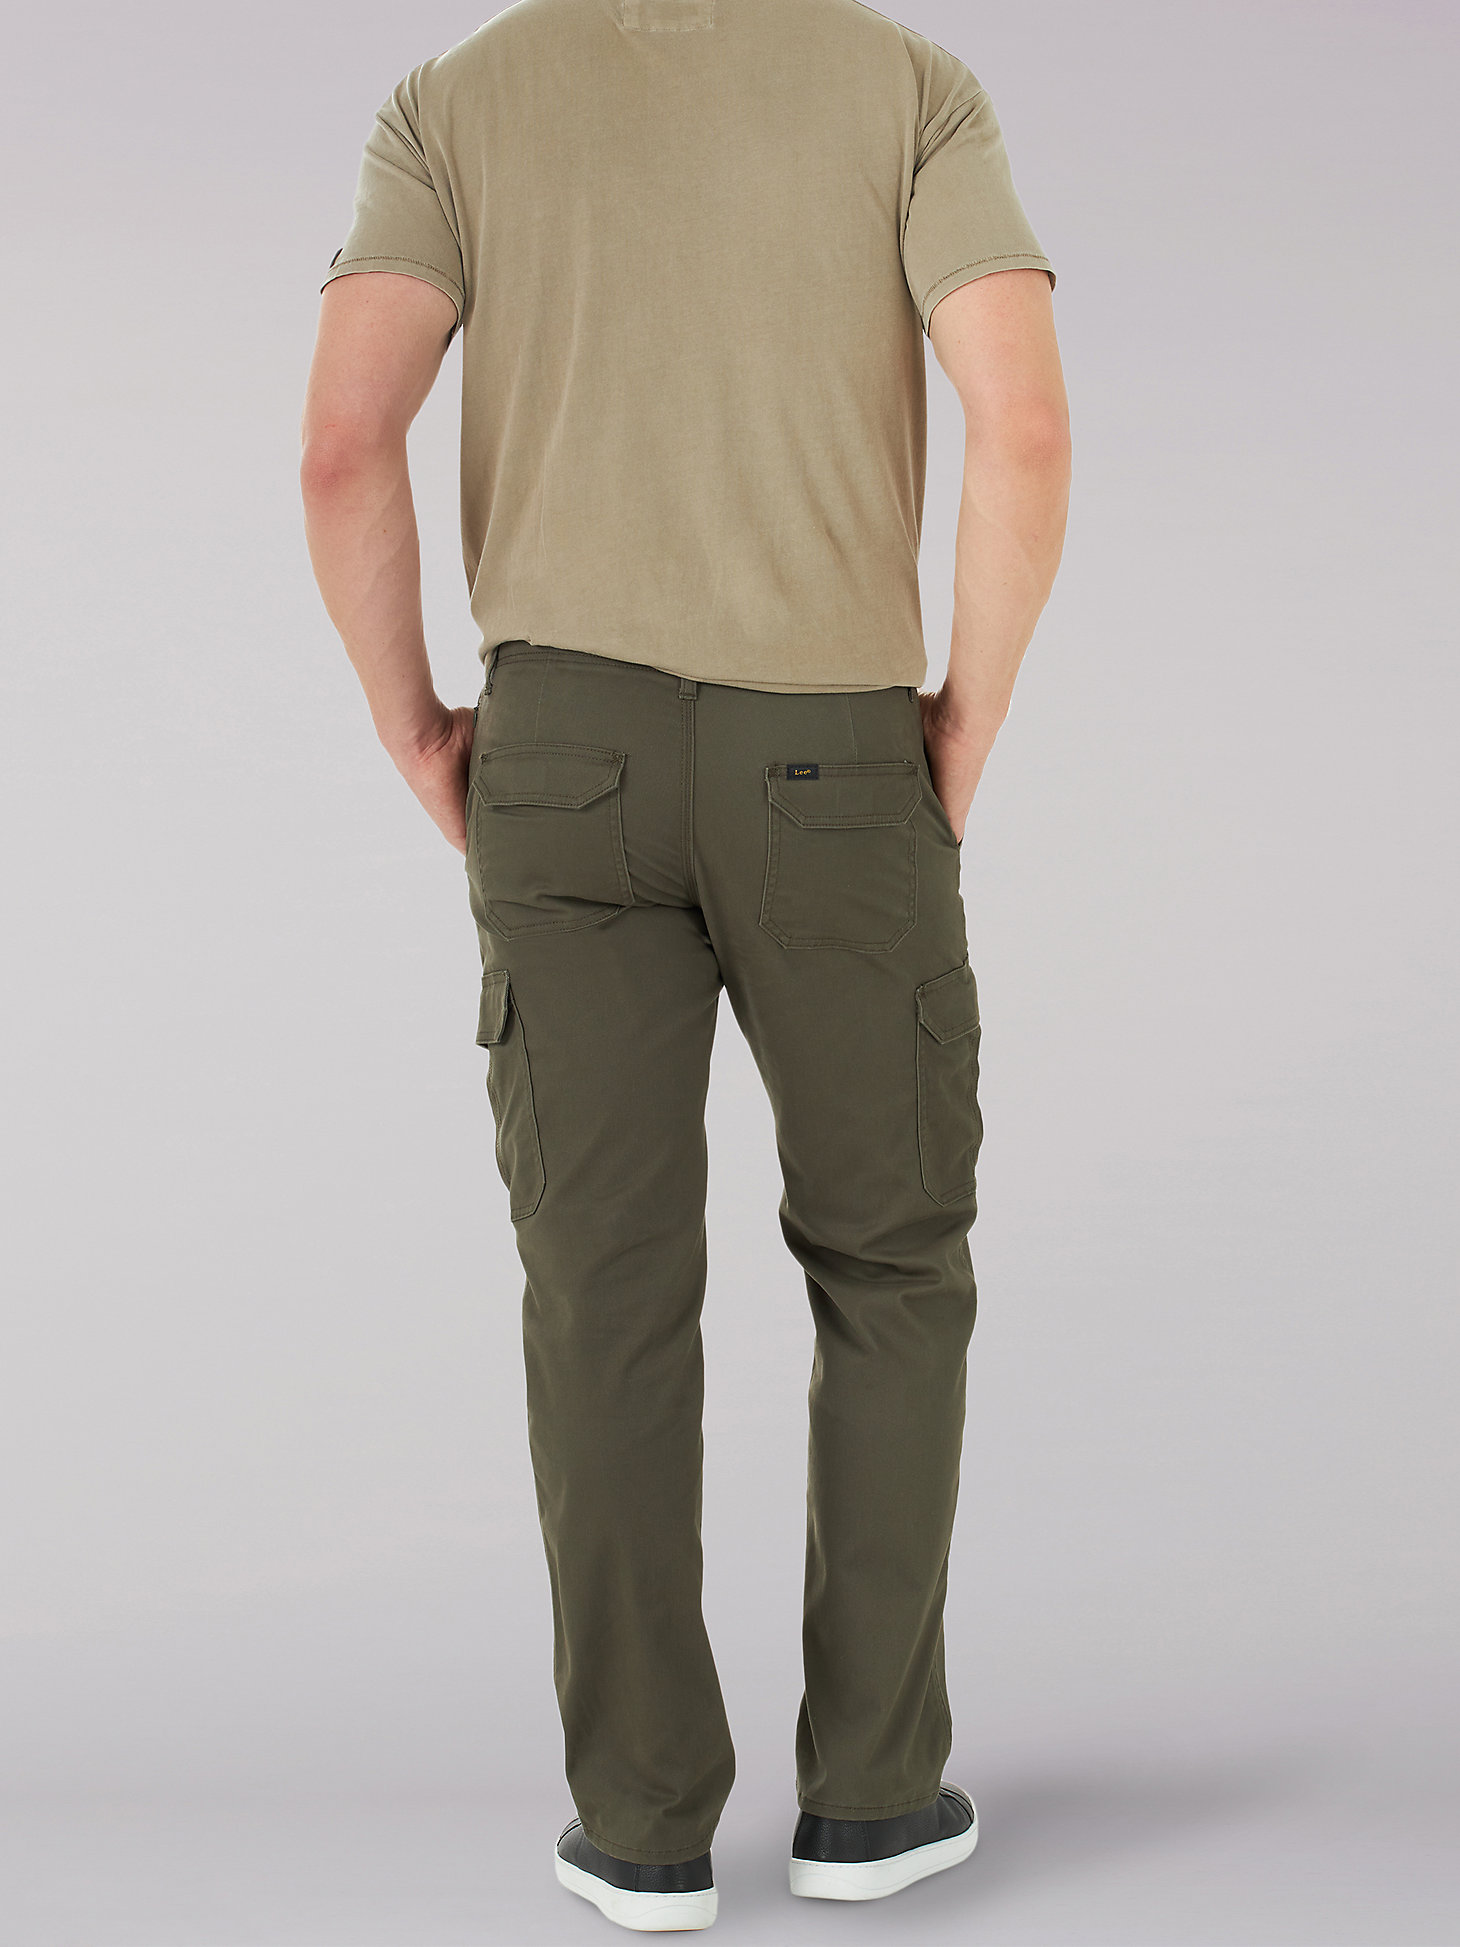 Men's MVP Straight Fit Cargo Pant in Forest alternative view 1